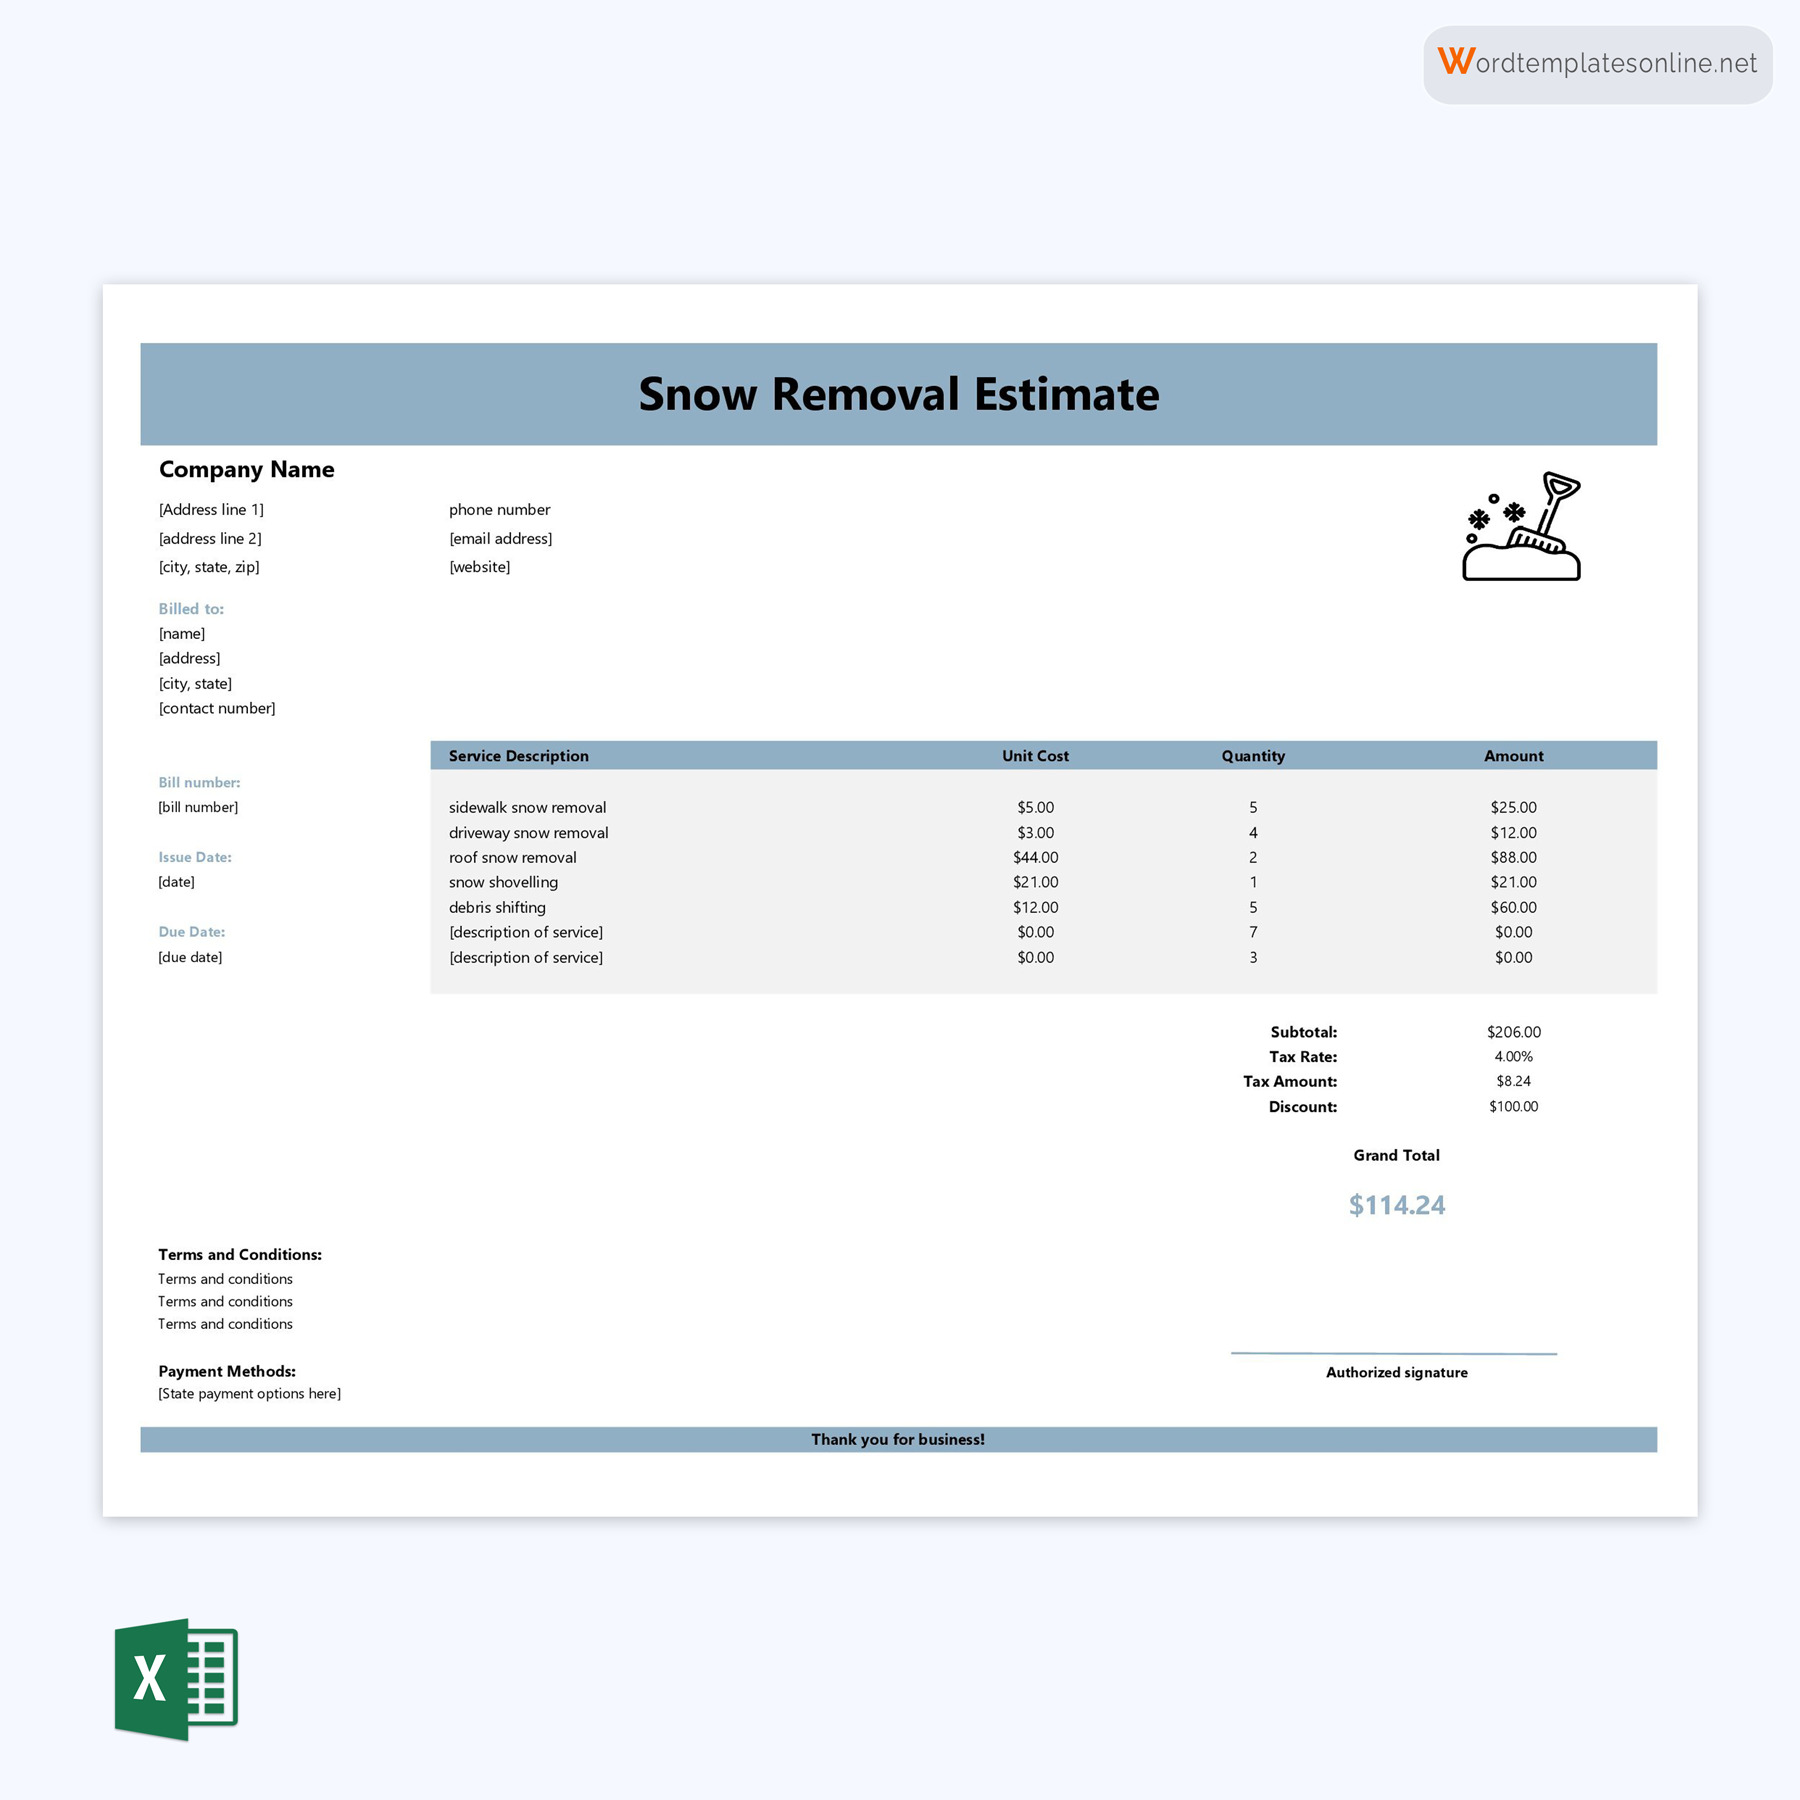 Download Your Free Snow Removal Estimate Sample in Editable Format